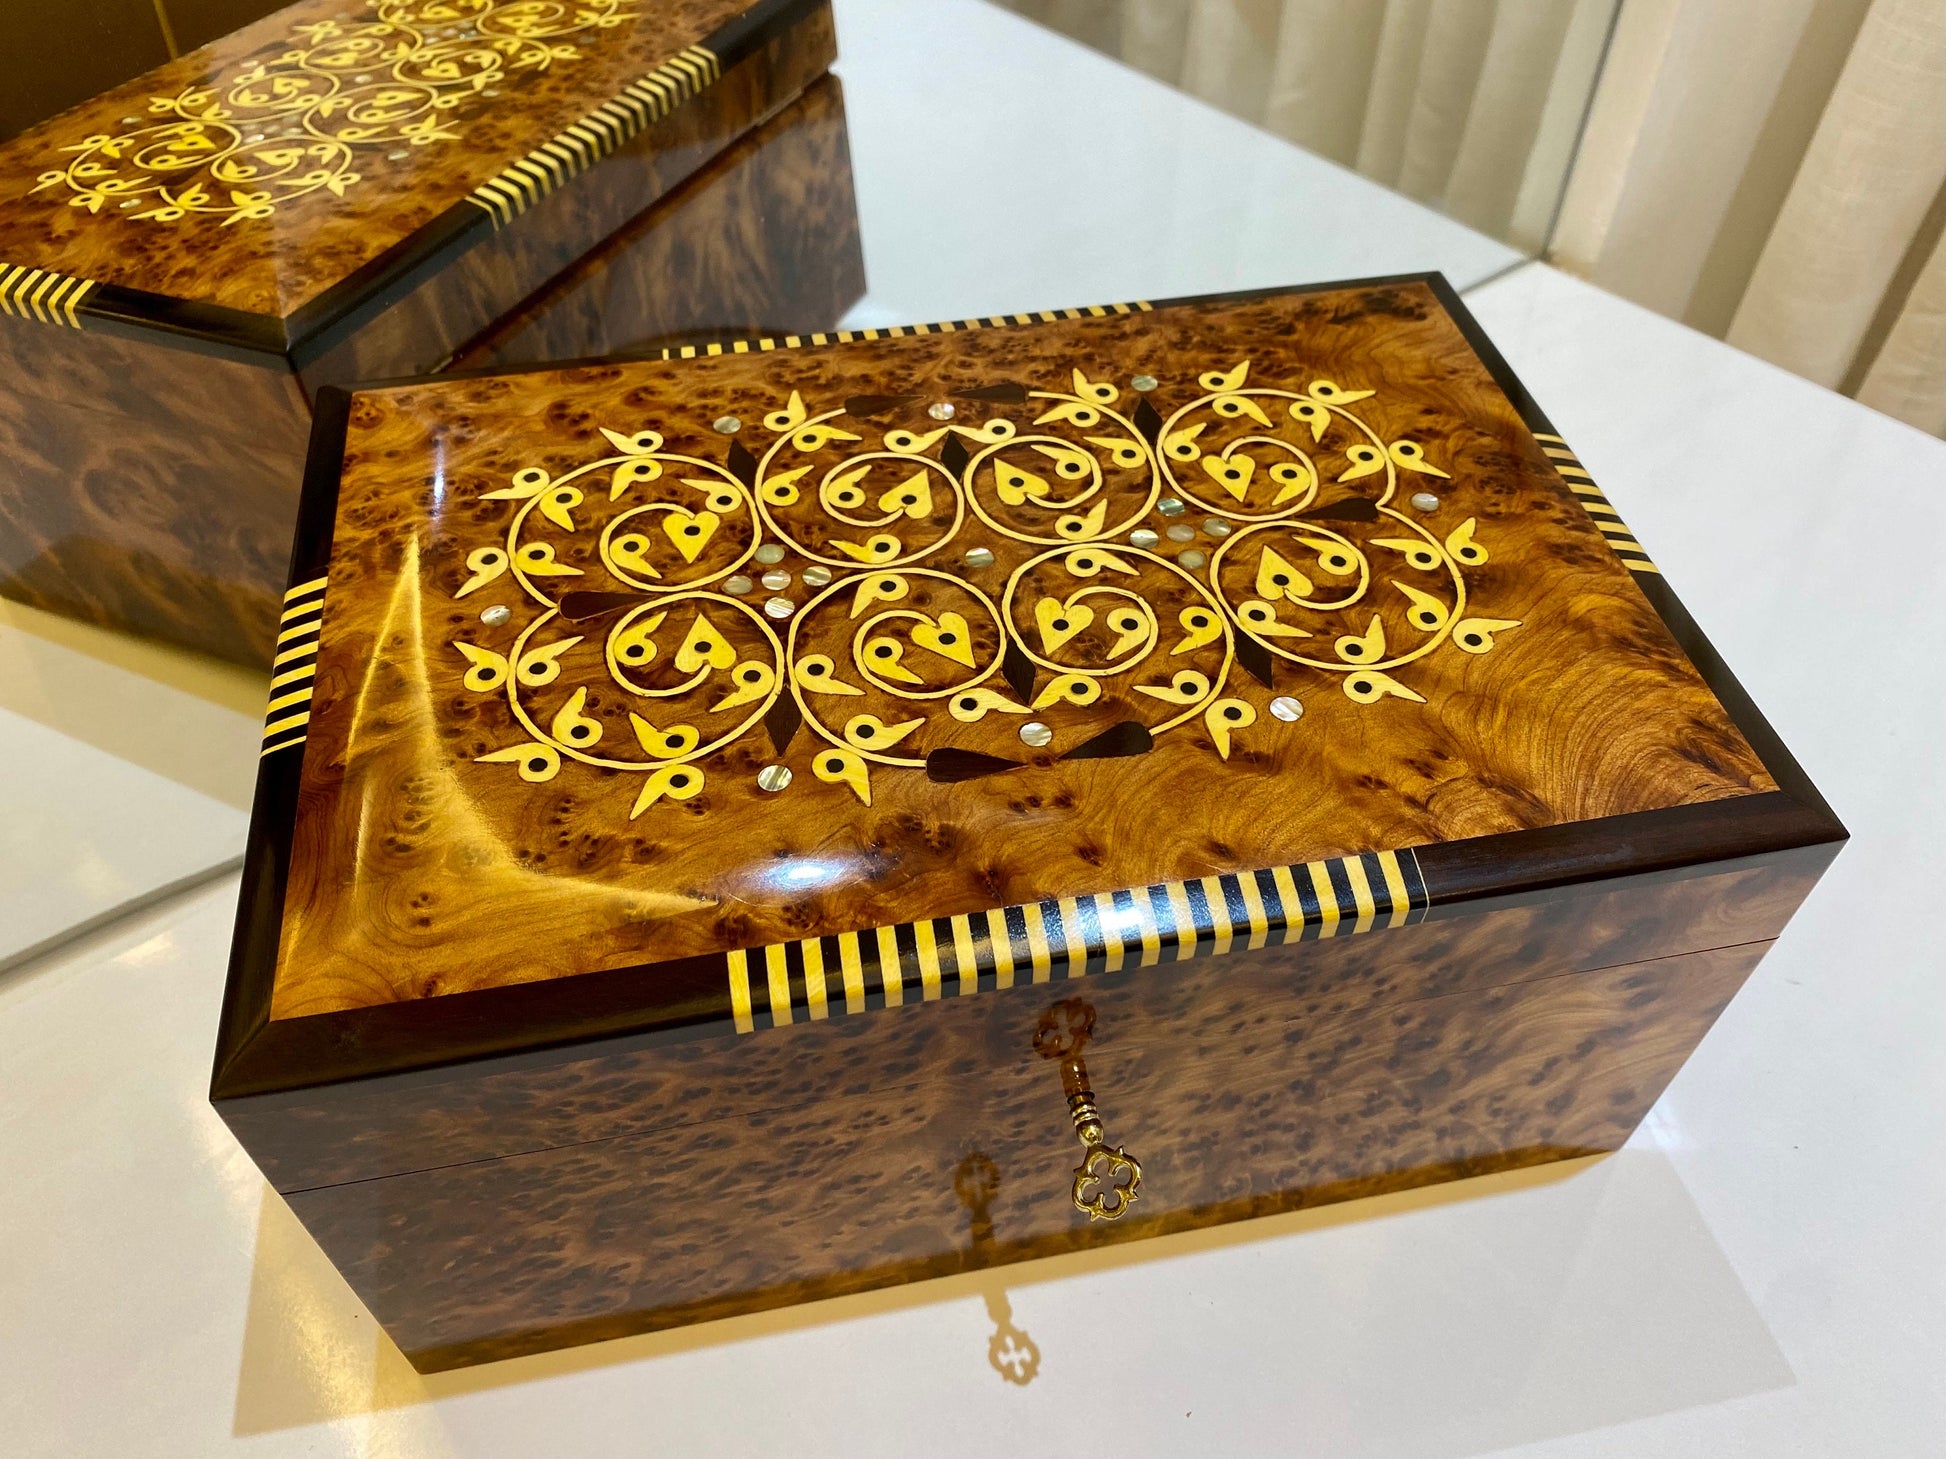 10"x6" Morrocan juniper jewellery Box wood engraved with mother of pearls,lemon wood,lockable thuya wooden jewellery vintage Box with key